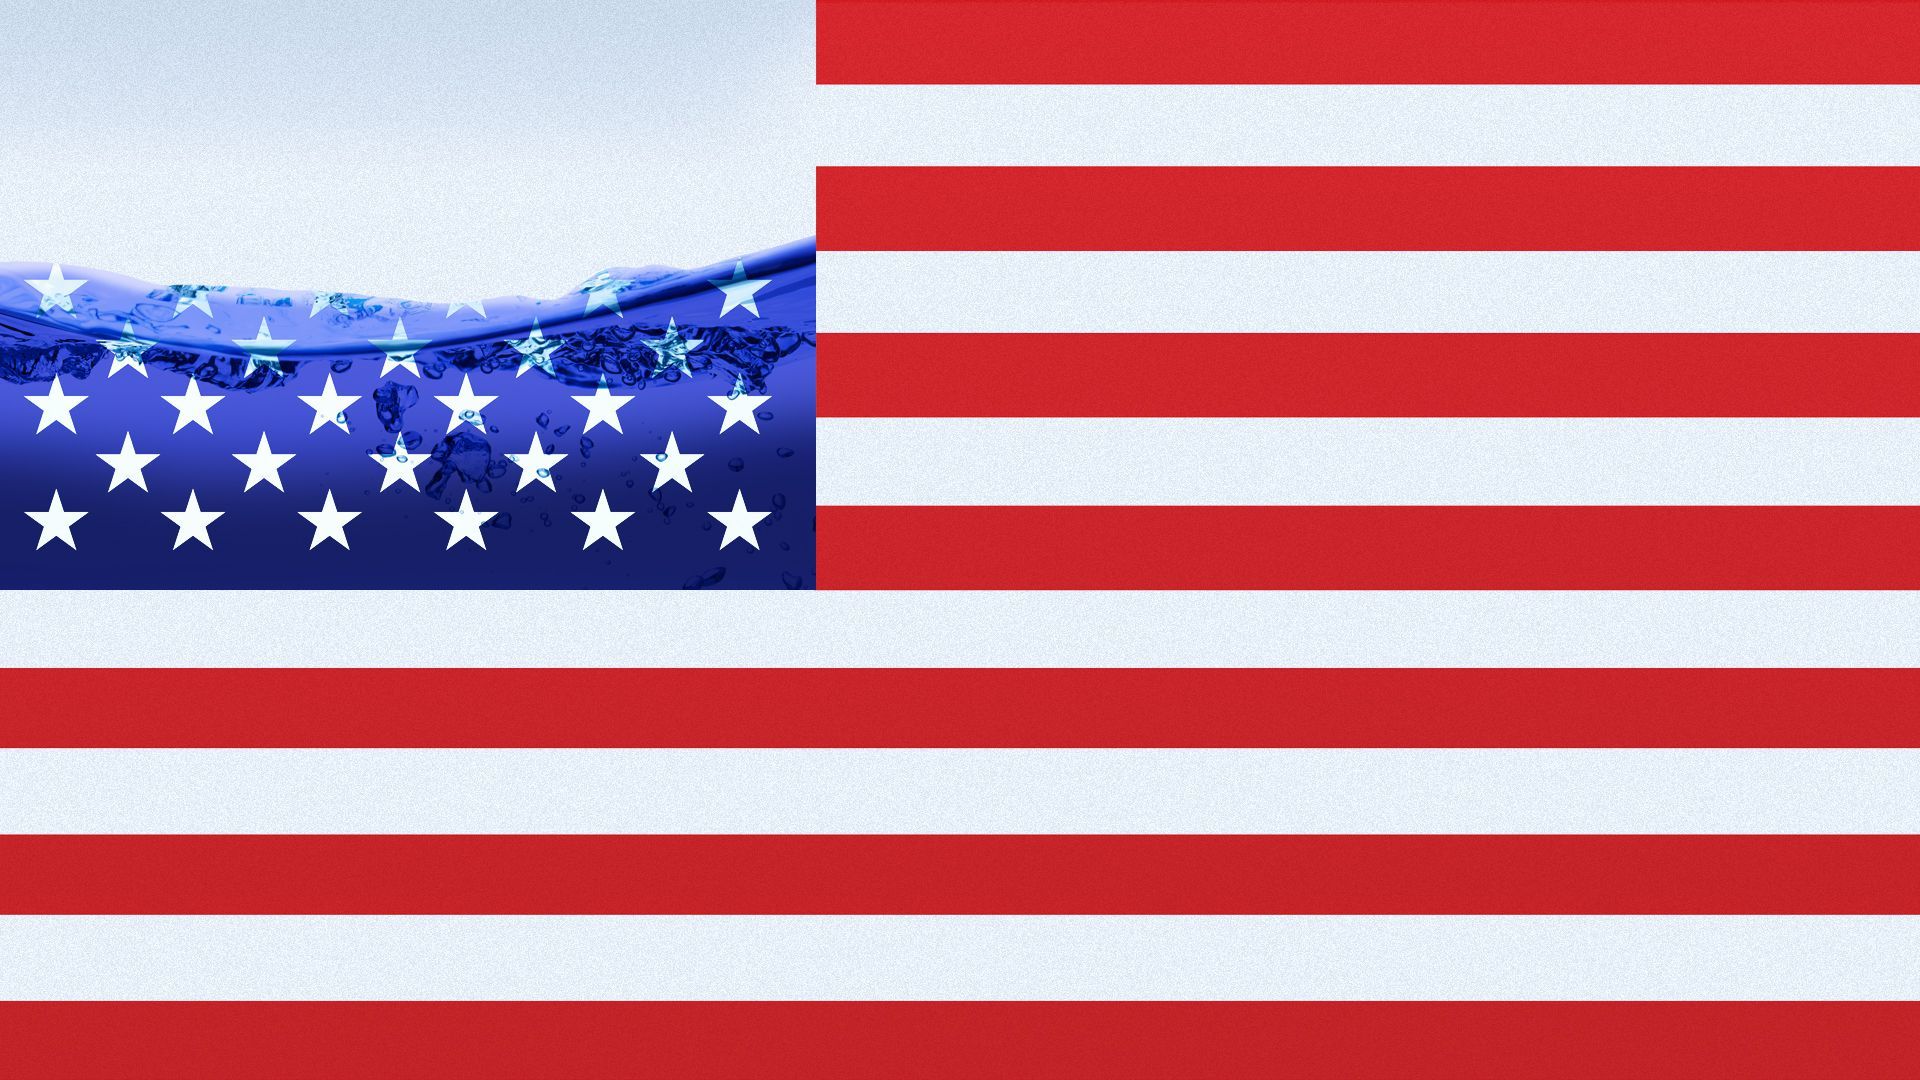 Illustration of an American flag with the blue half full with water